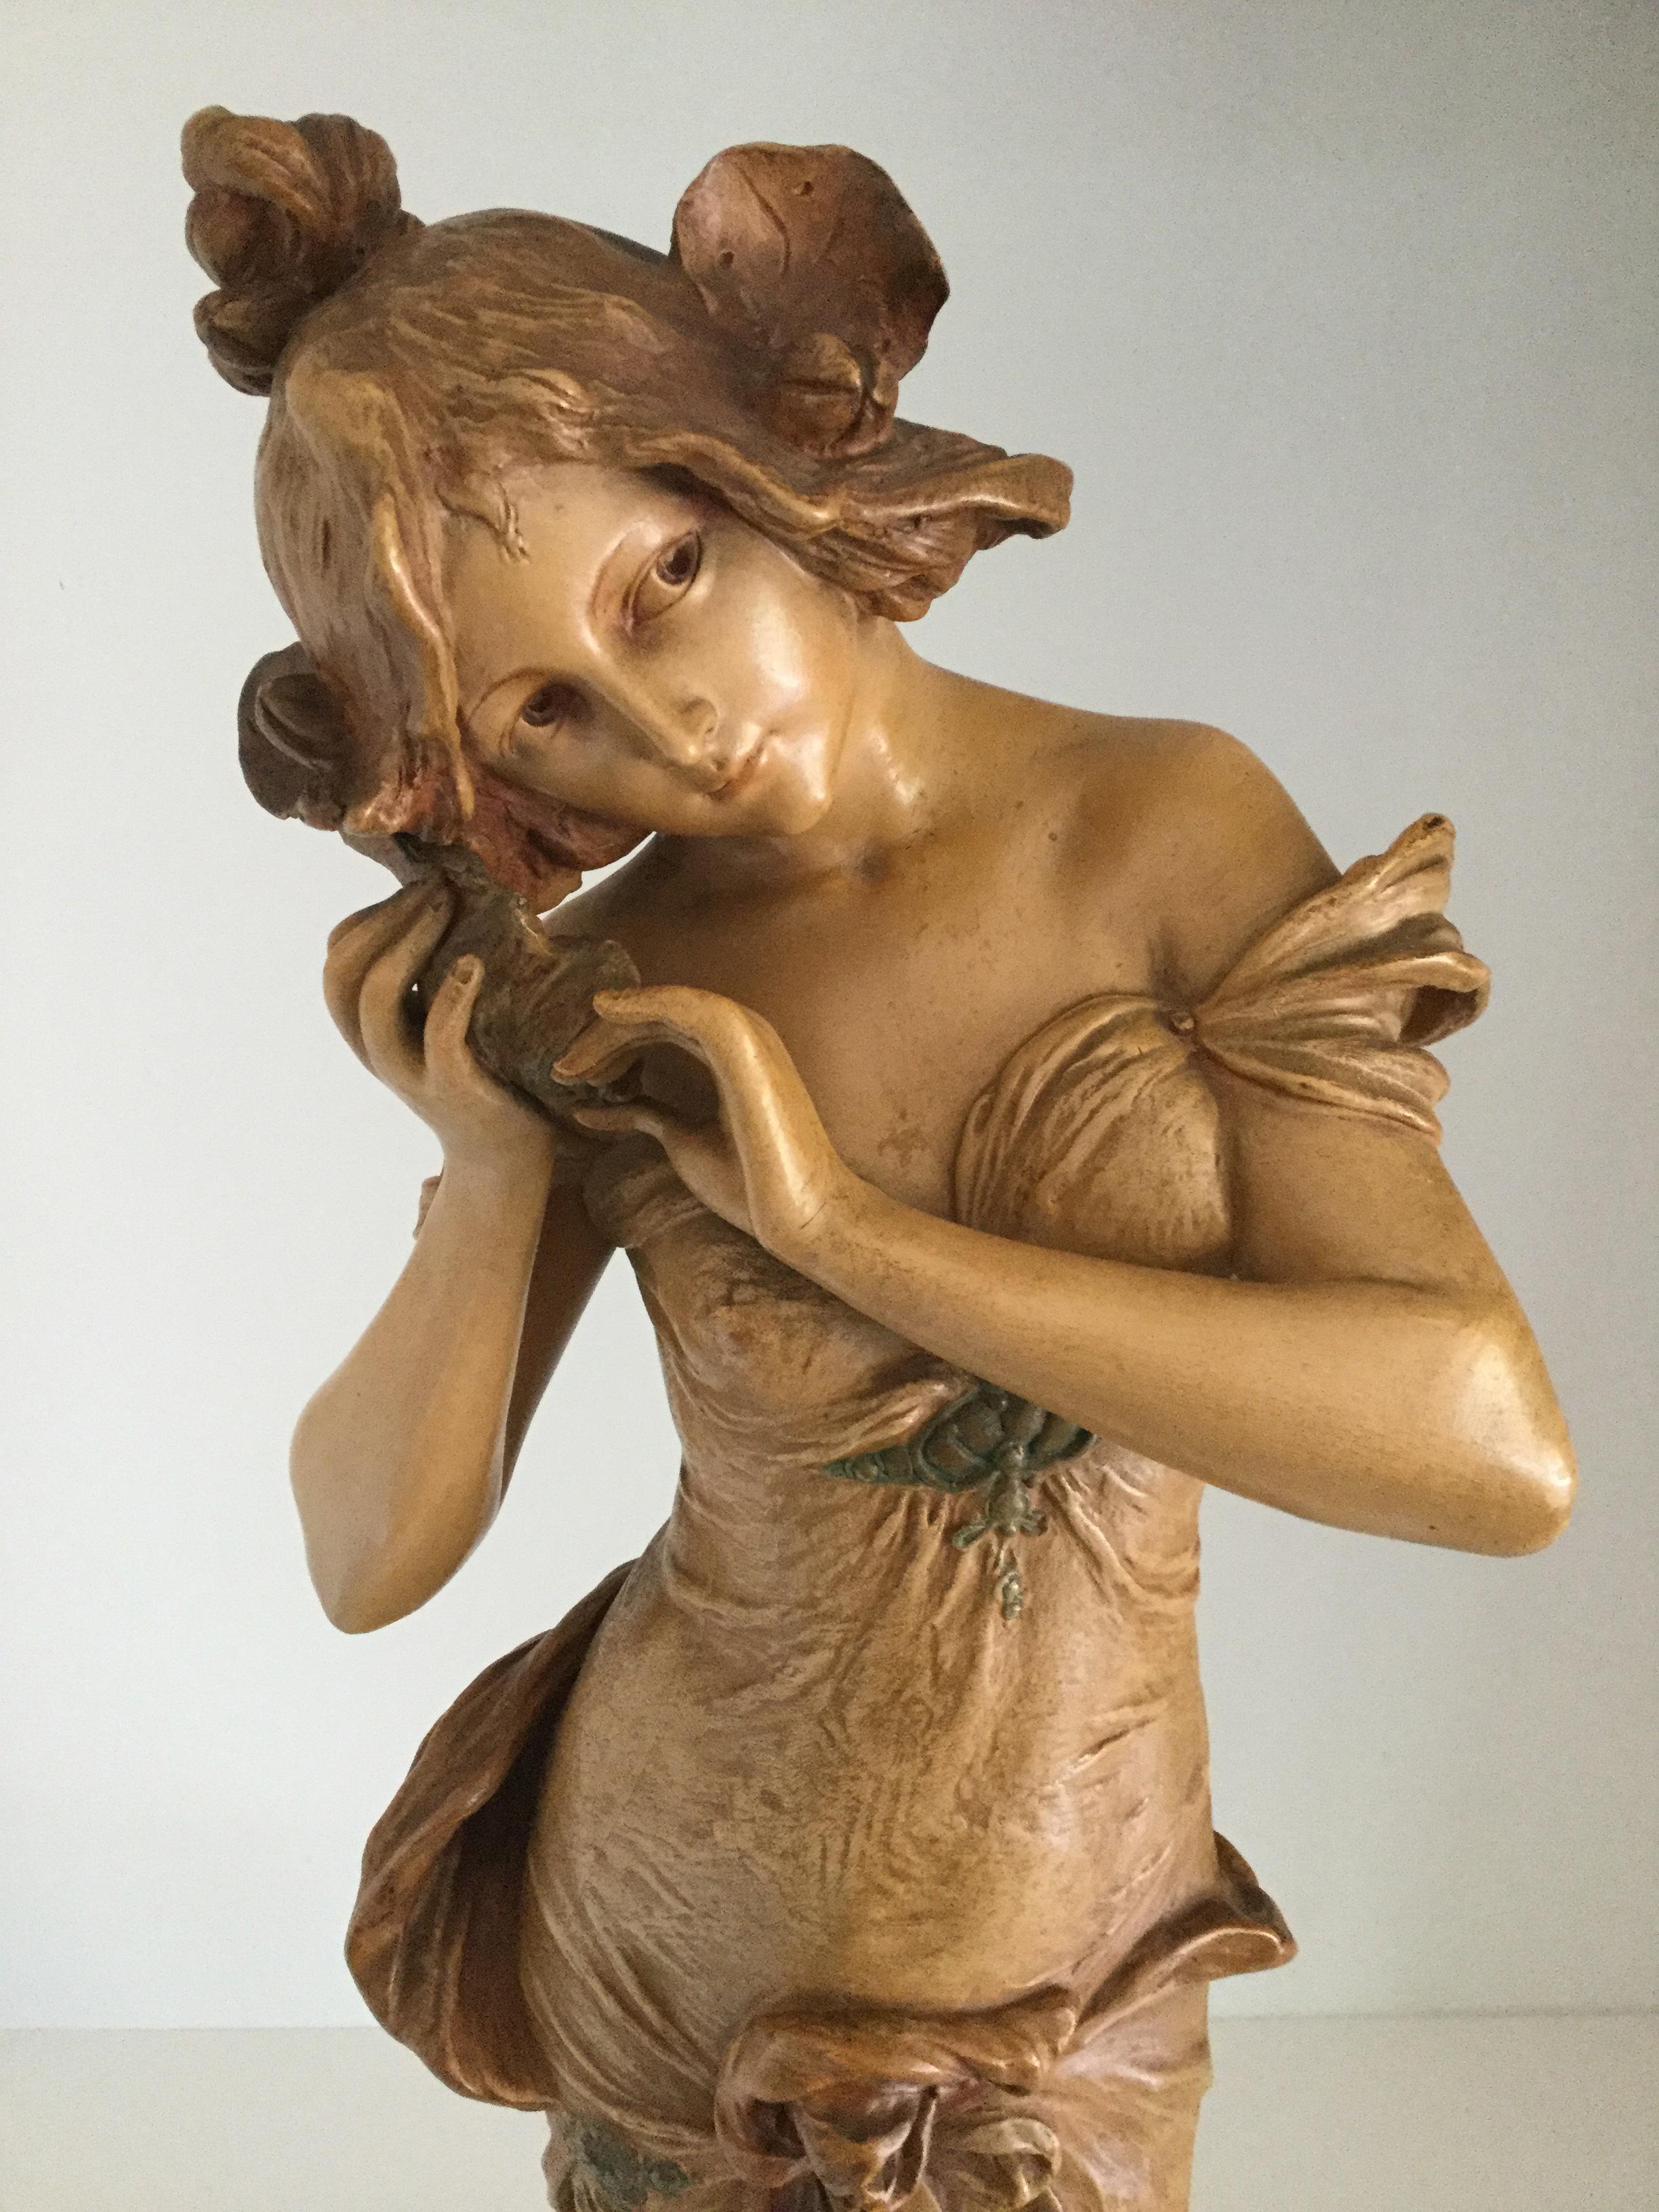 An Austrian Ernst Wahliss Art Nouveau figurine, circa 1880

Ernst Wahliss (1837-1900), Austrian Art Nouveau ceramic sculptural figure of a semi draped maiden listening to a shell, modeled in a long cascading robe with golden tones and highlights